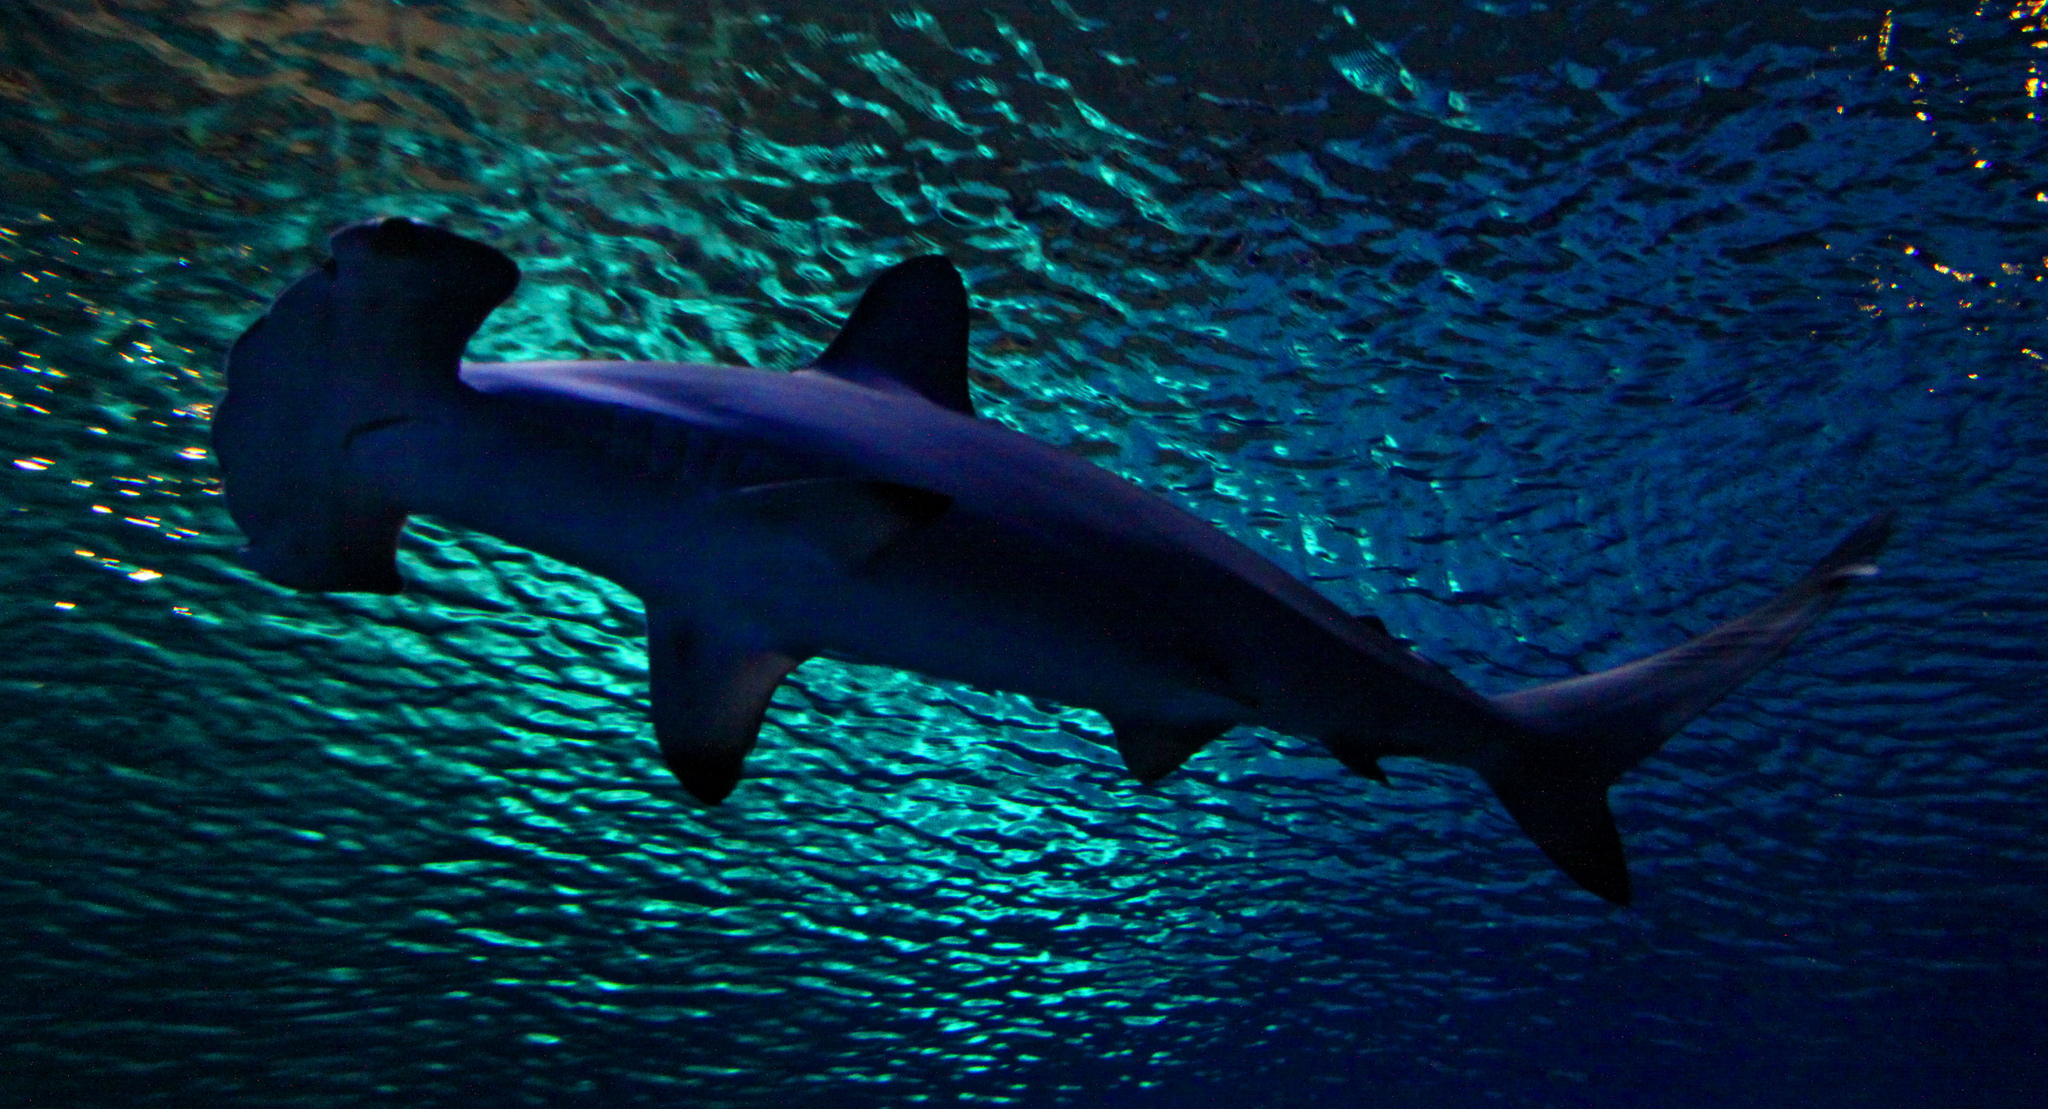 Seafood Fraud: Study Finds Threatened Sharks Being Served In Fish Fillets